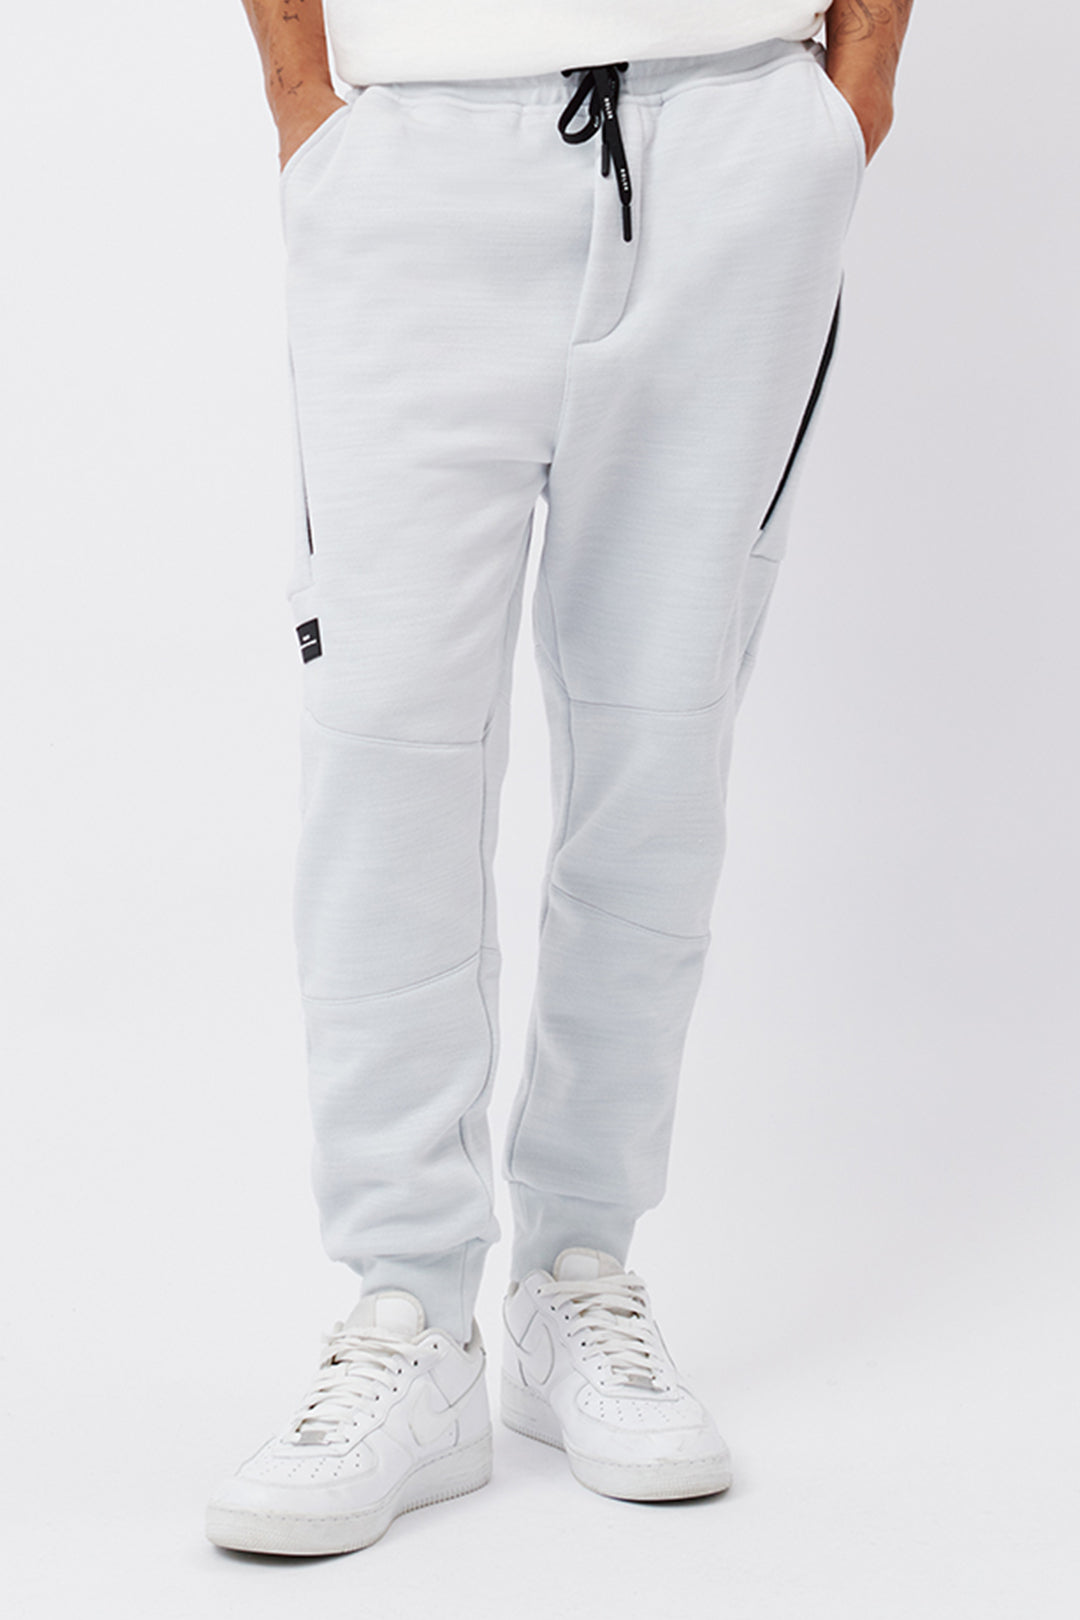 The Witton Trackie - Light Blue Marle - Roler Clothing